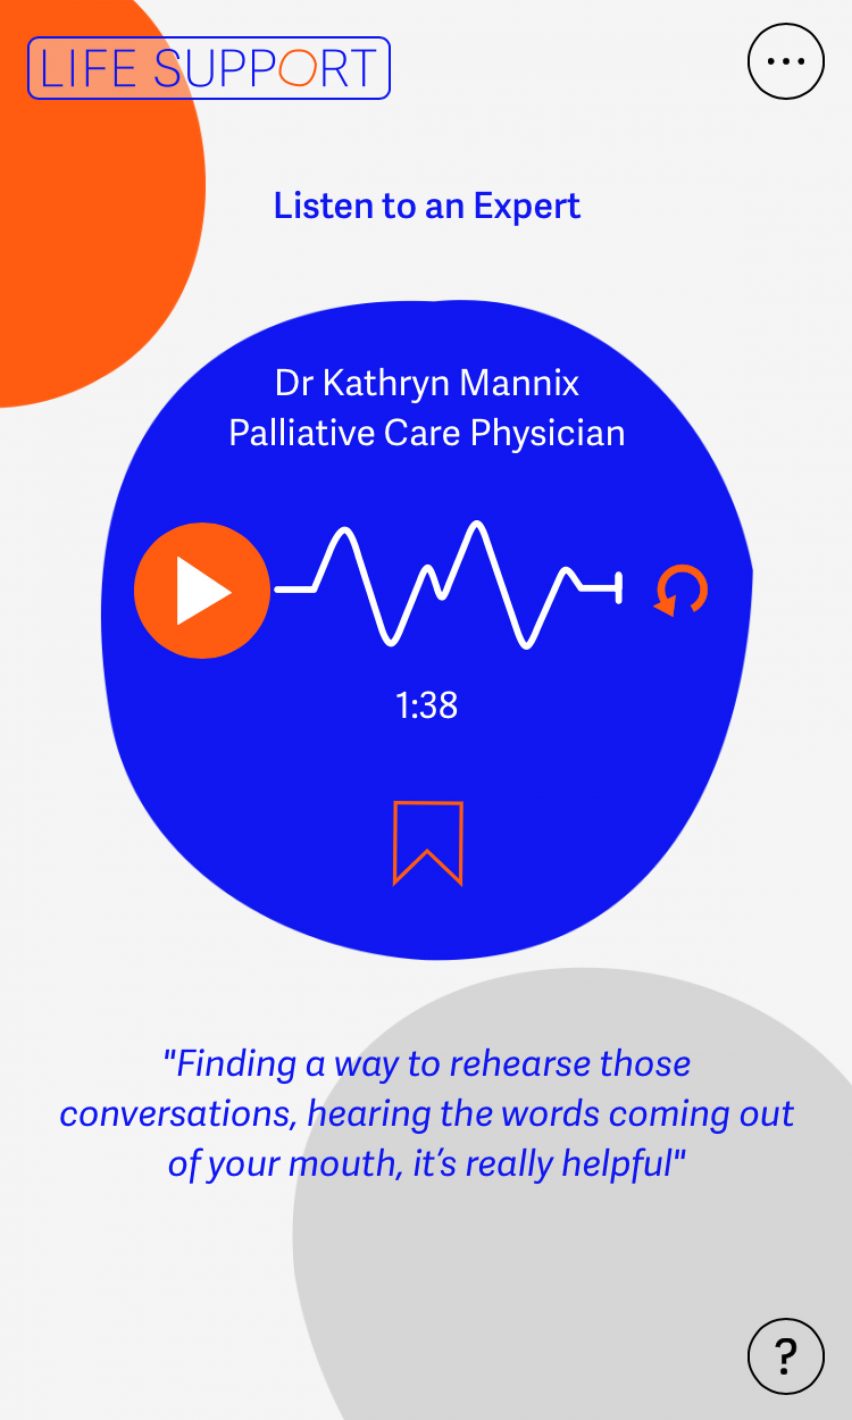 An audio clip from an expert in palliative care